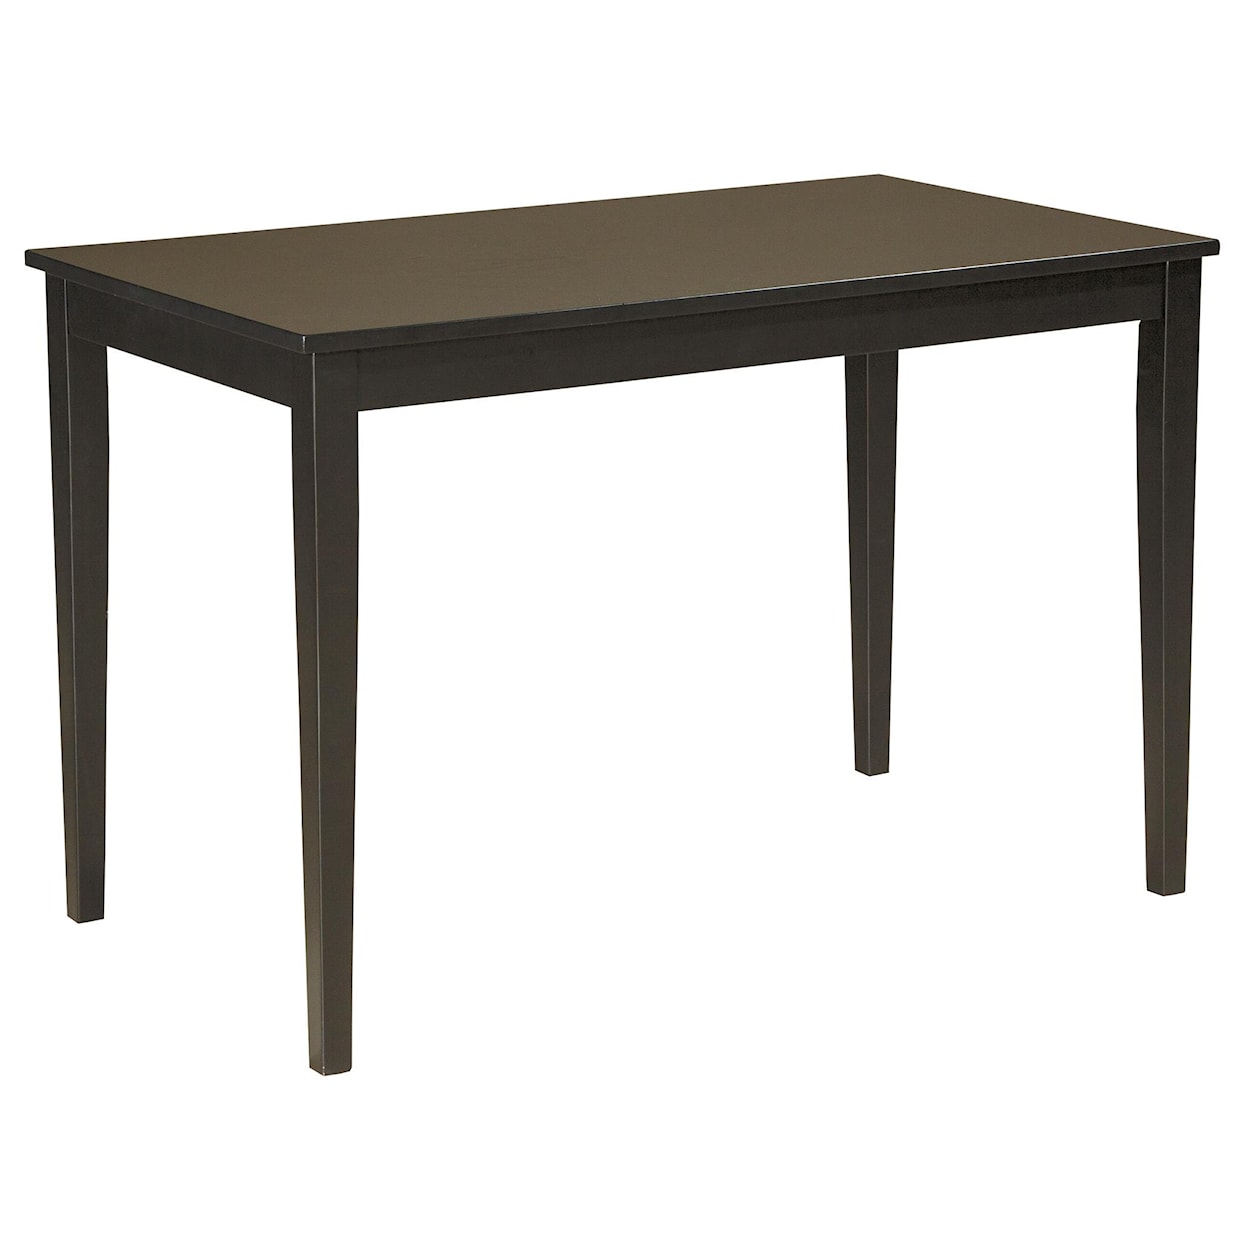 Signature Design by Ashley Kimonte Rectangular Dining Room Table